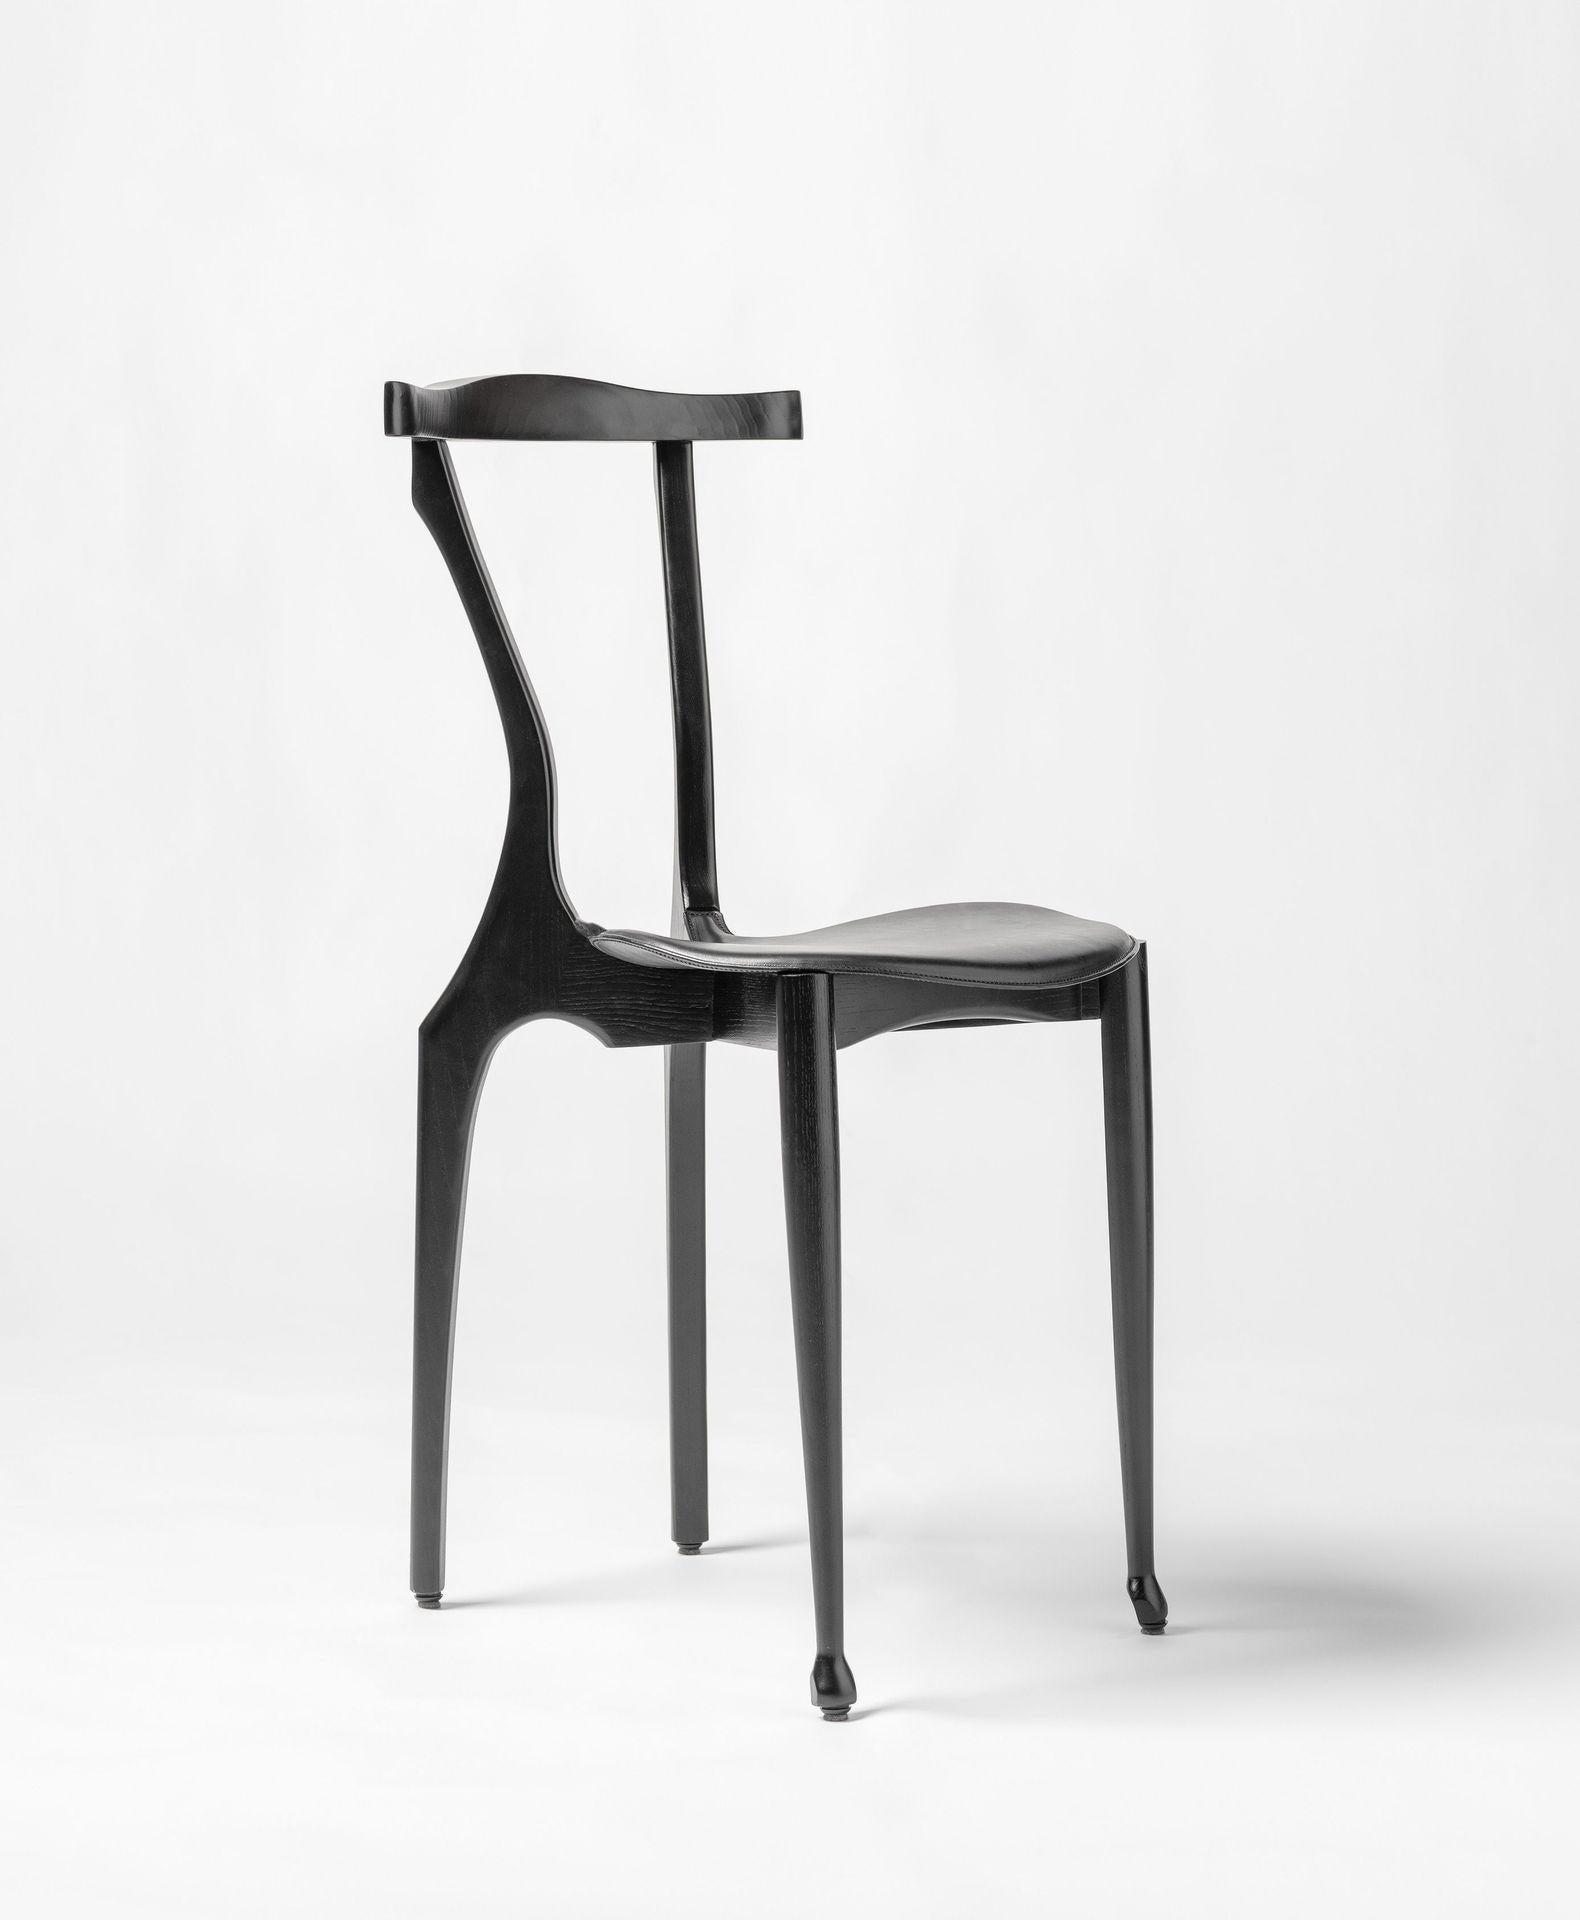 Gaulinetta black chair by Oscar Tusquets
Dimensions: D 40 x W 52 x H 83 cm.
Materials: ash wood

The Gaulino chair was designed in 1987. BD re-edited it, improving it in 2010. It’s probably one of the best designs by Oscar Tusquets. Even though